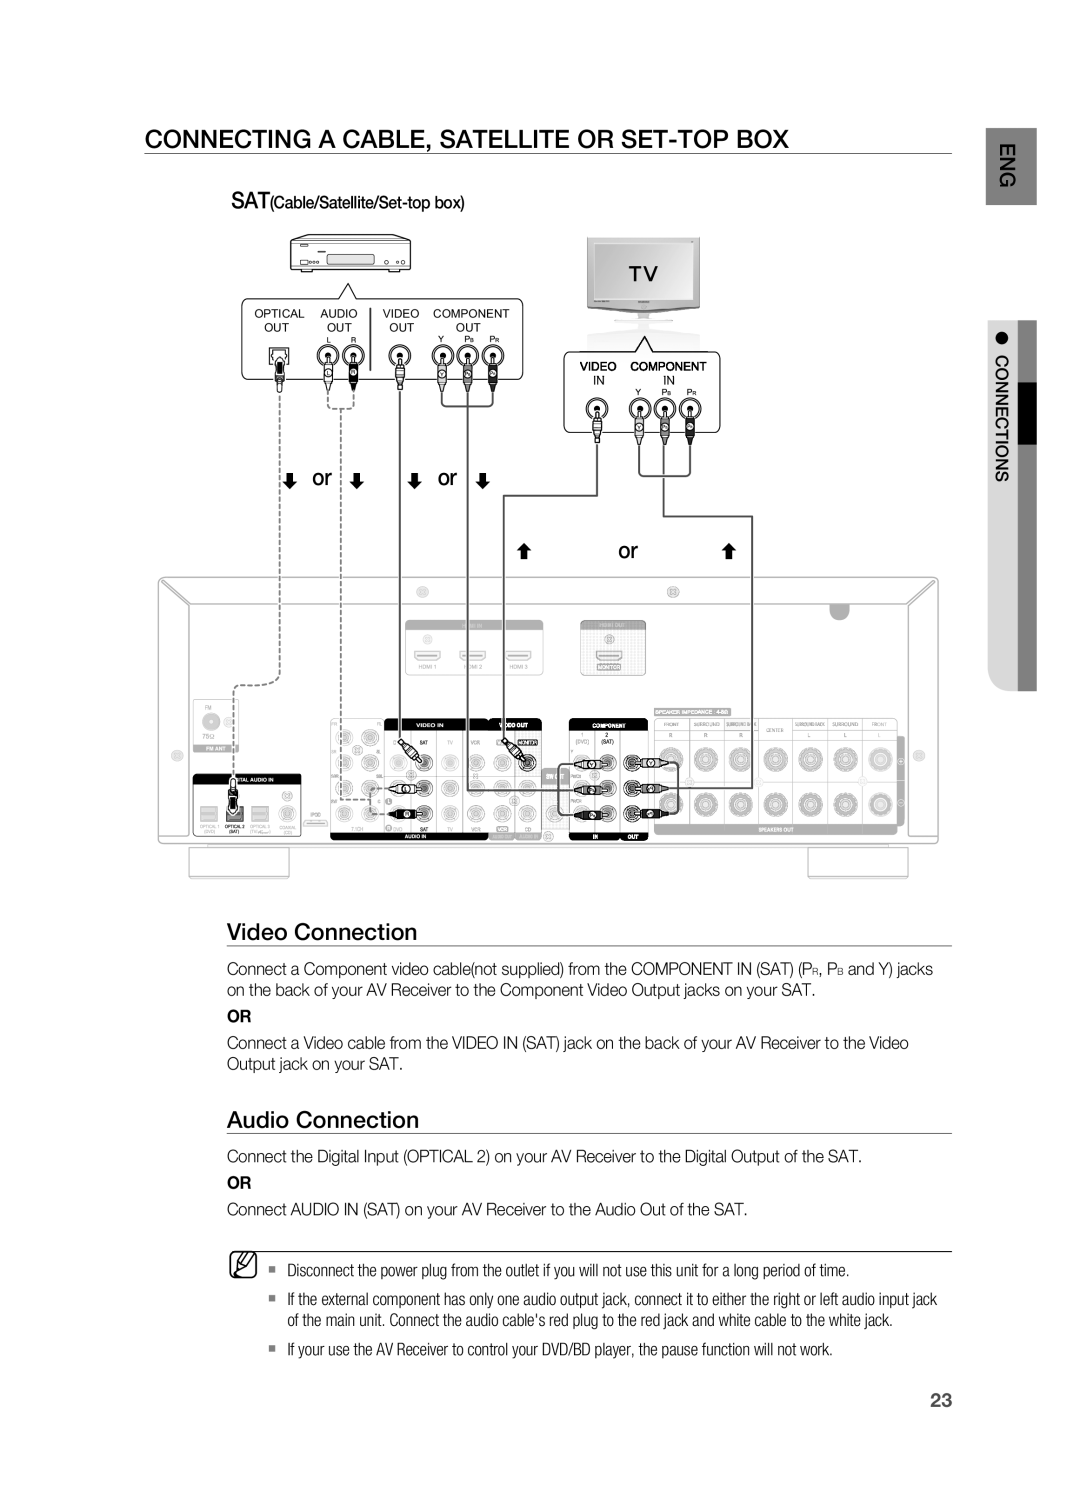 Samsung HT-AS730S user manual Connecting a Cable, Satellite or Set-topbox, or or or, Video Connection, Audio Connection 